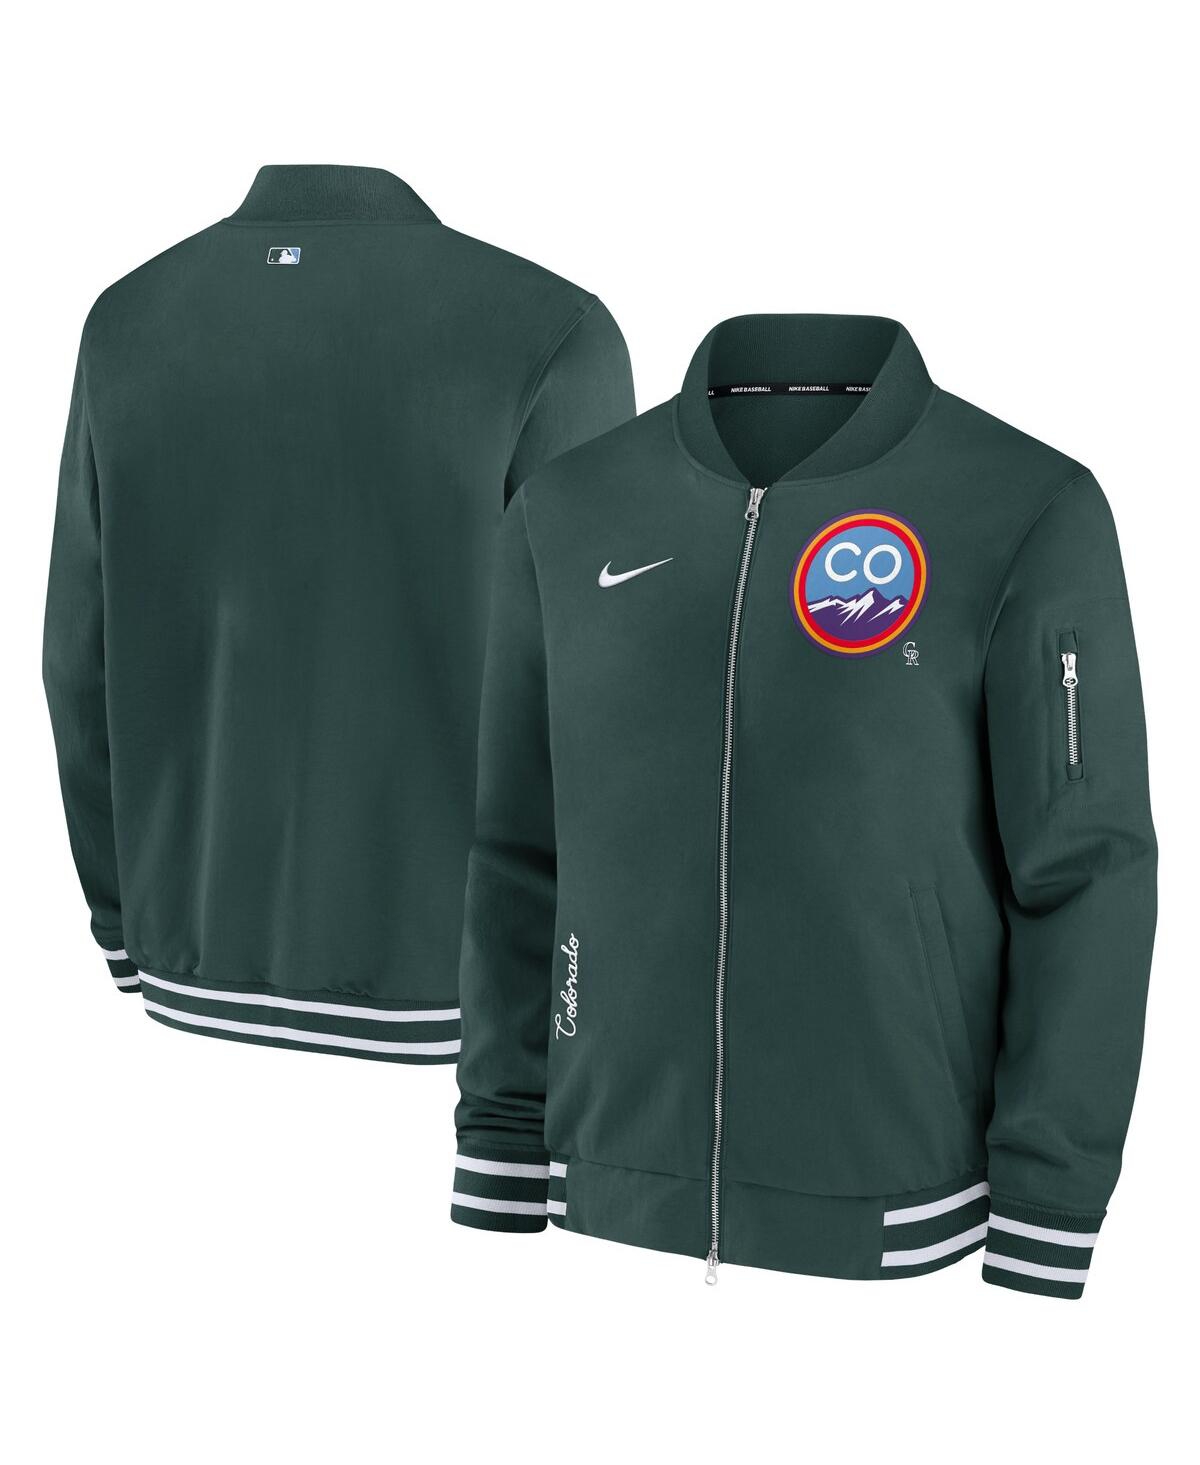 Men's Nike Hunter Green Colorado Rockies Authentic Collection Game Time Bomber Full-Zip Jacket - Hunter Green